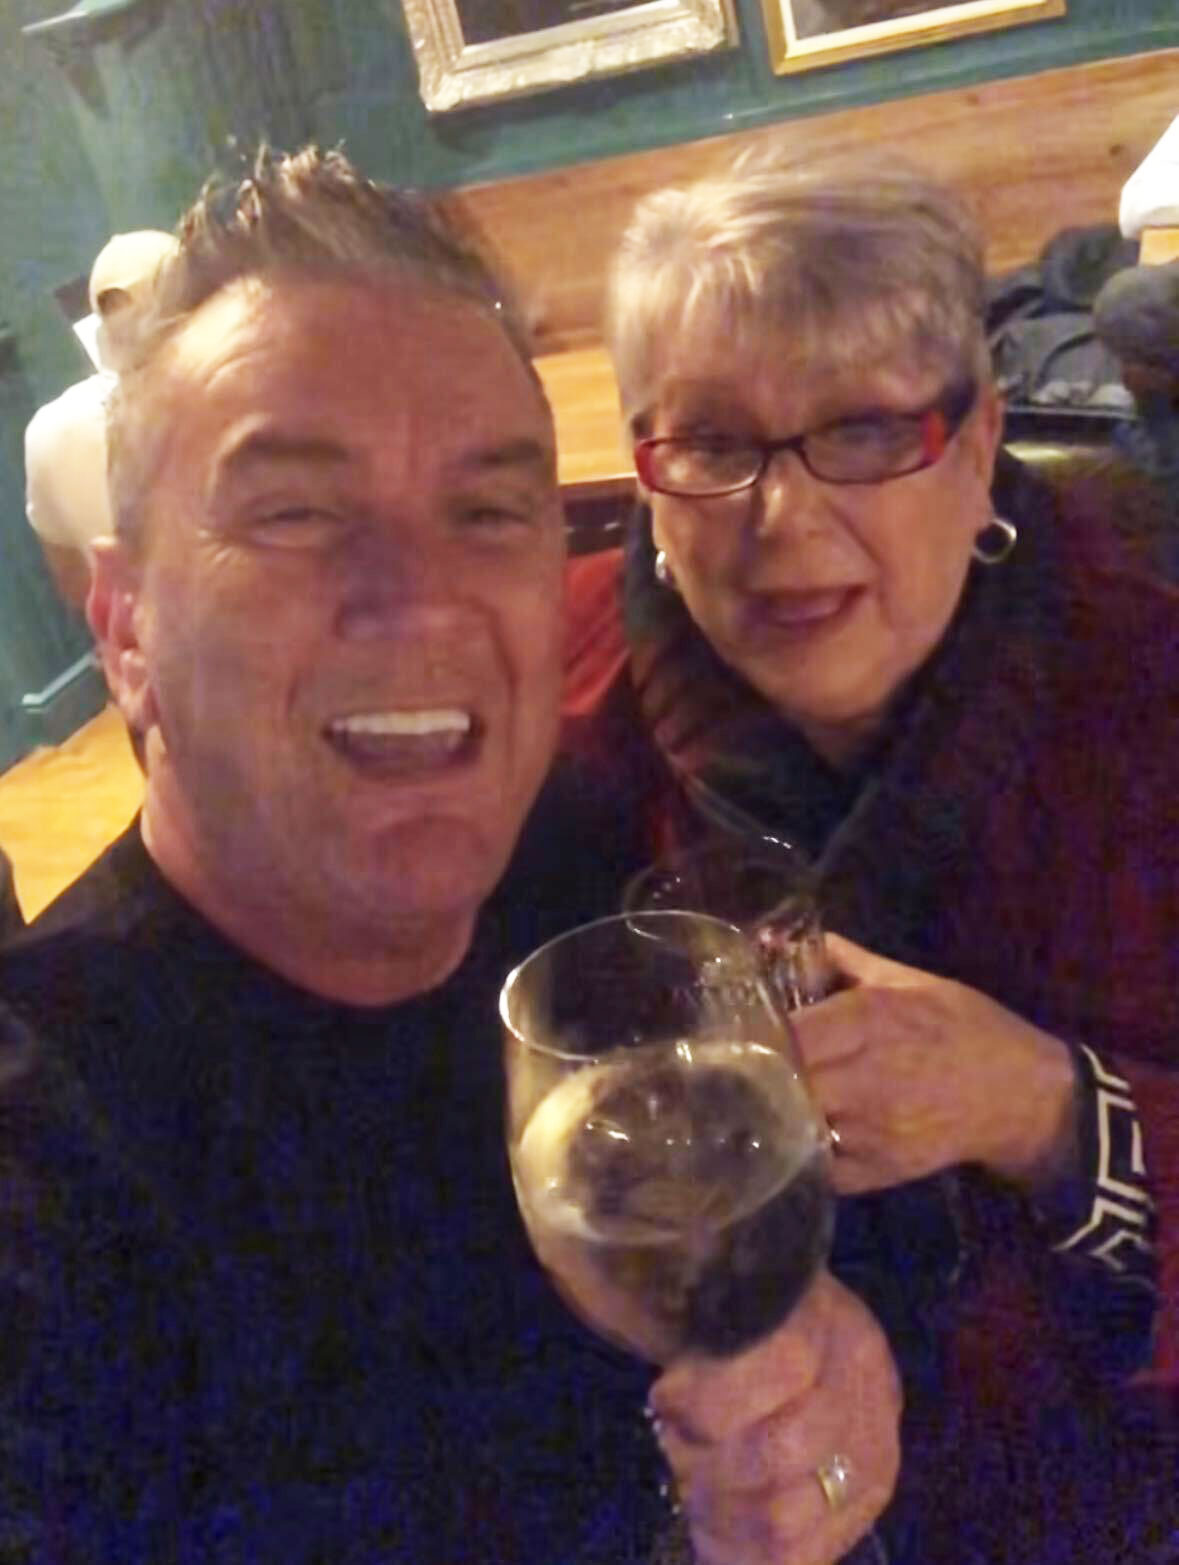 Gogglebox legends Jenny and Lee enjoy boozy night out in the pub to mark huge show milestone